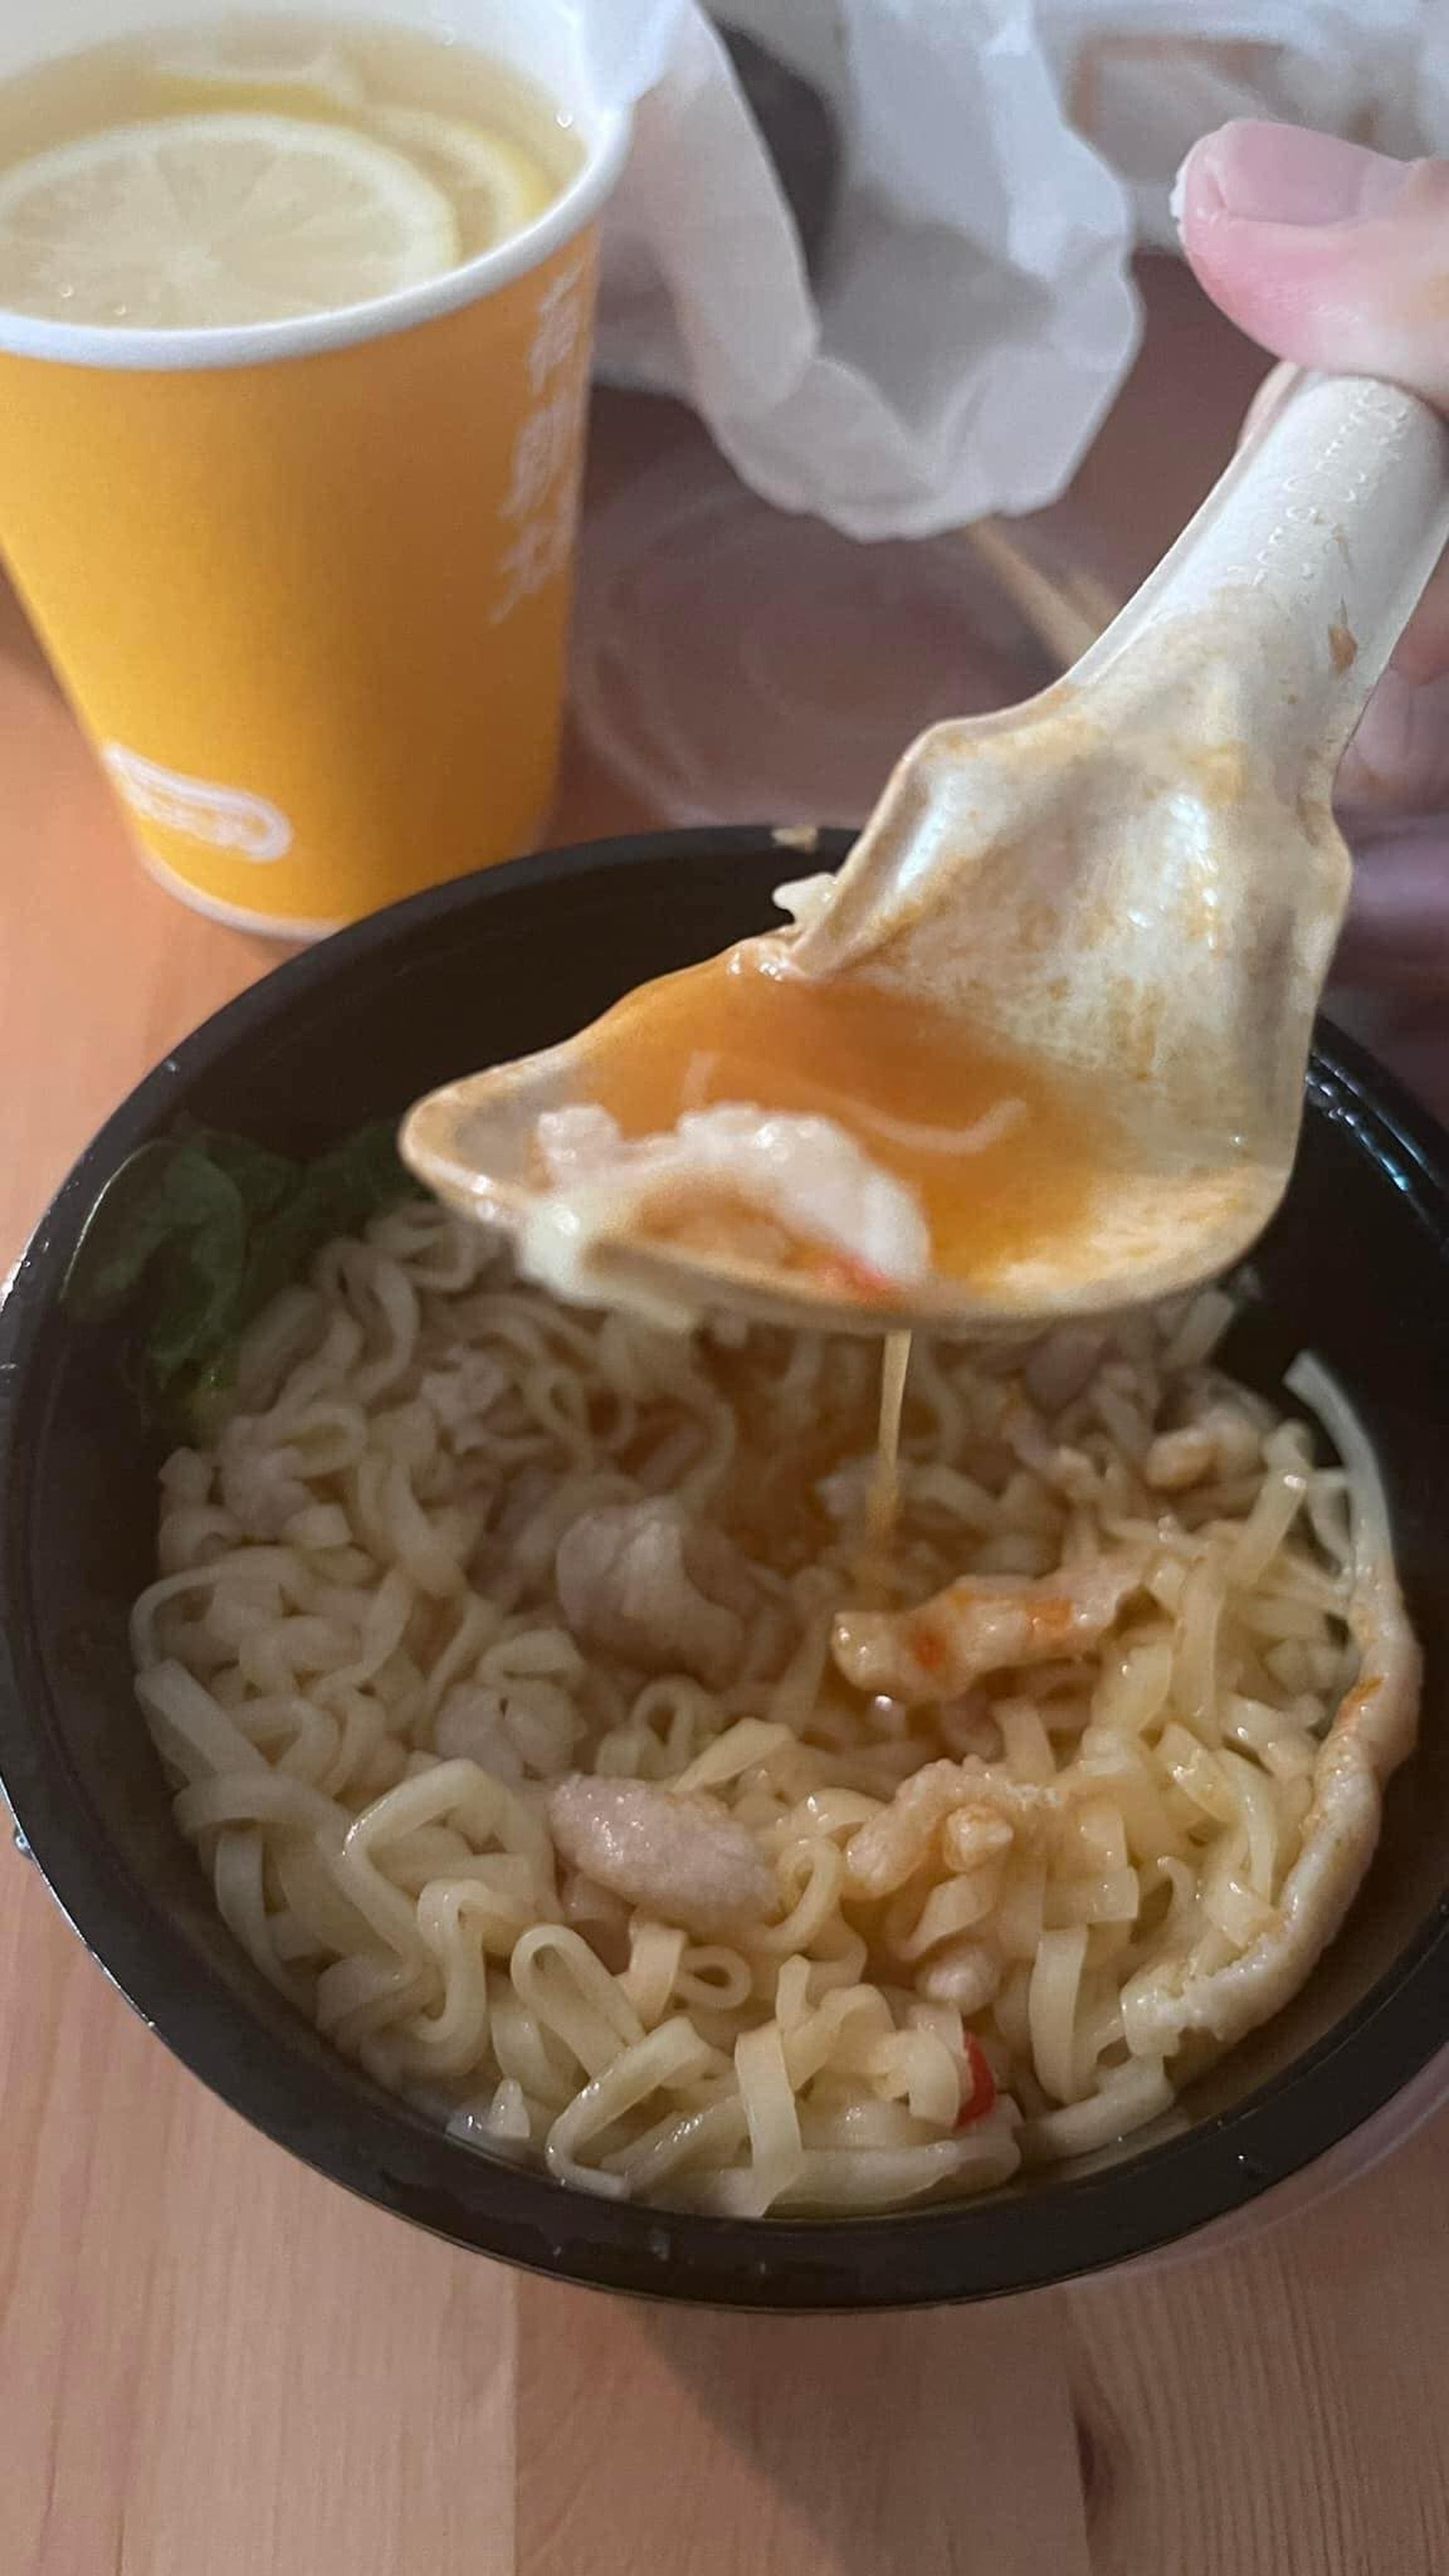 Some users have asked how long the spoon was left in the bowl before the pictures were taken. Photo: Facebook/Sam Leung